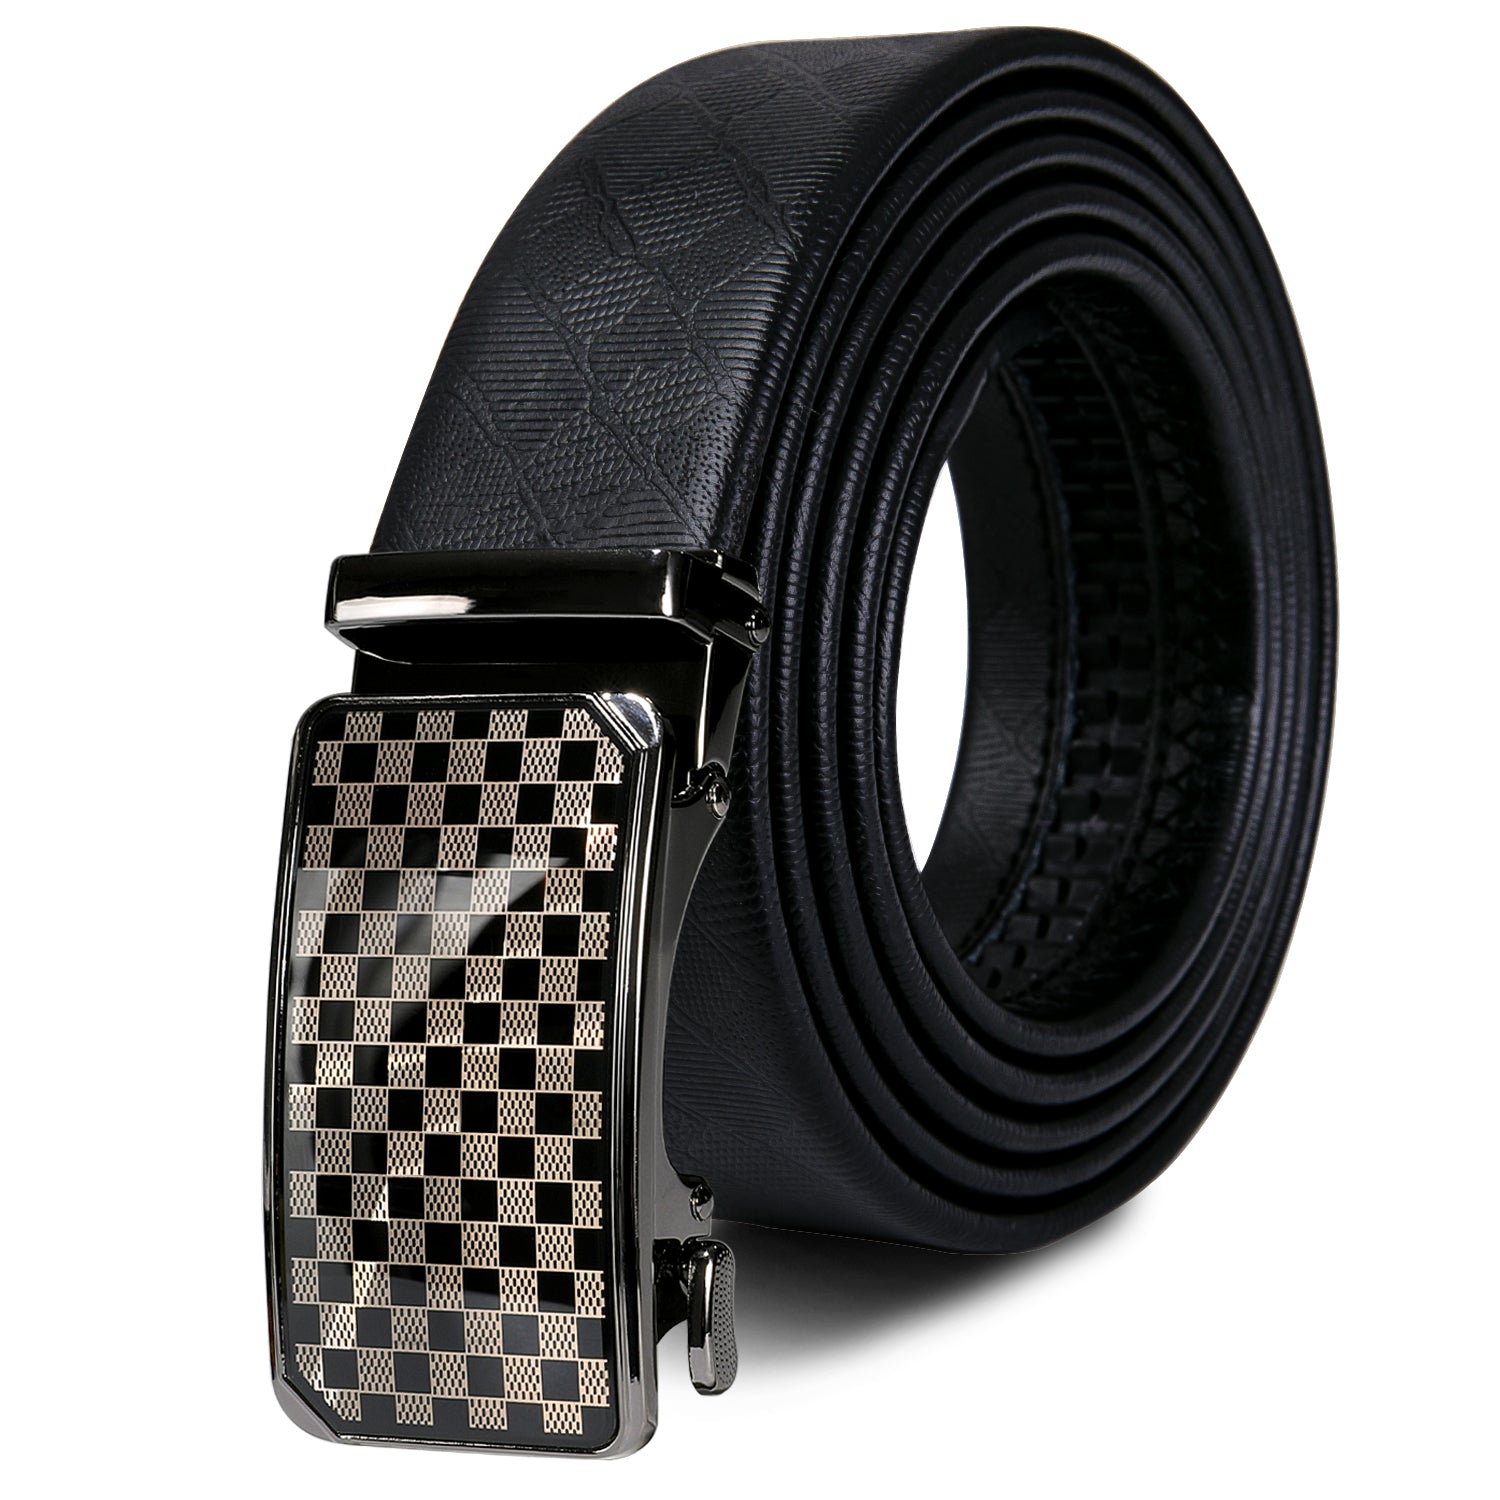 New Black Plaid Metal Buckle Genuine Leather Belt 43 inch to 63 inch